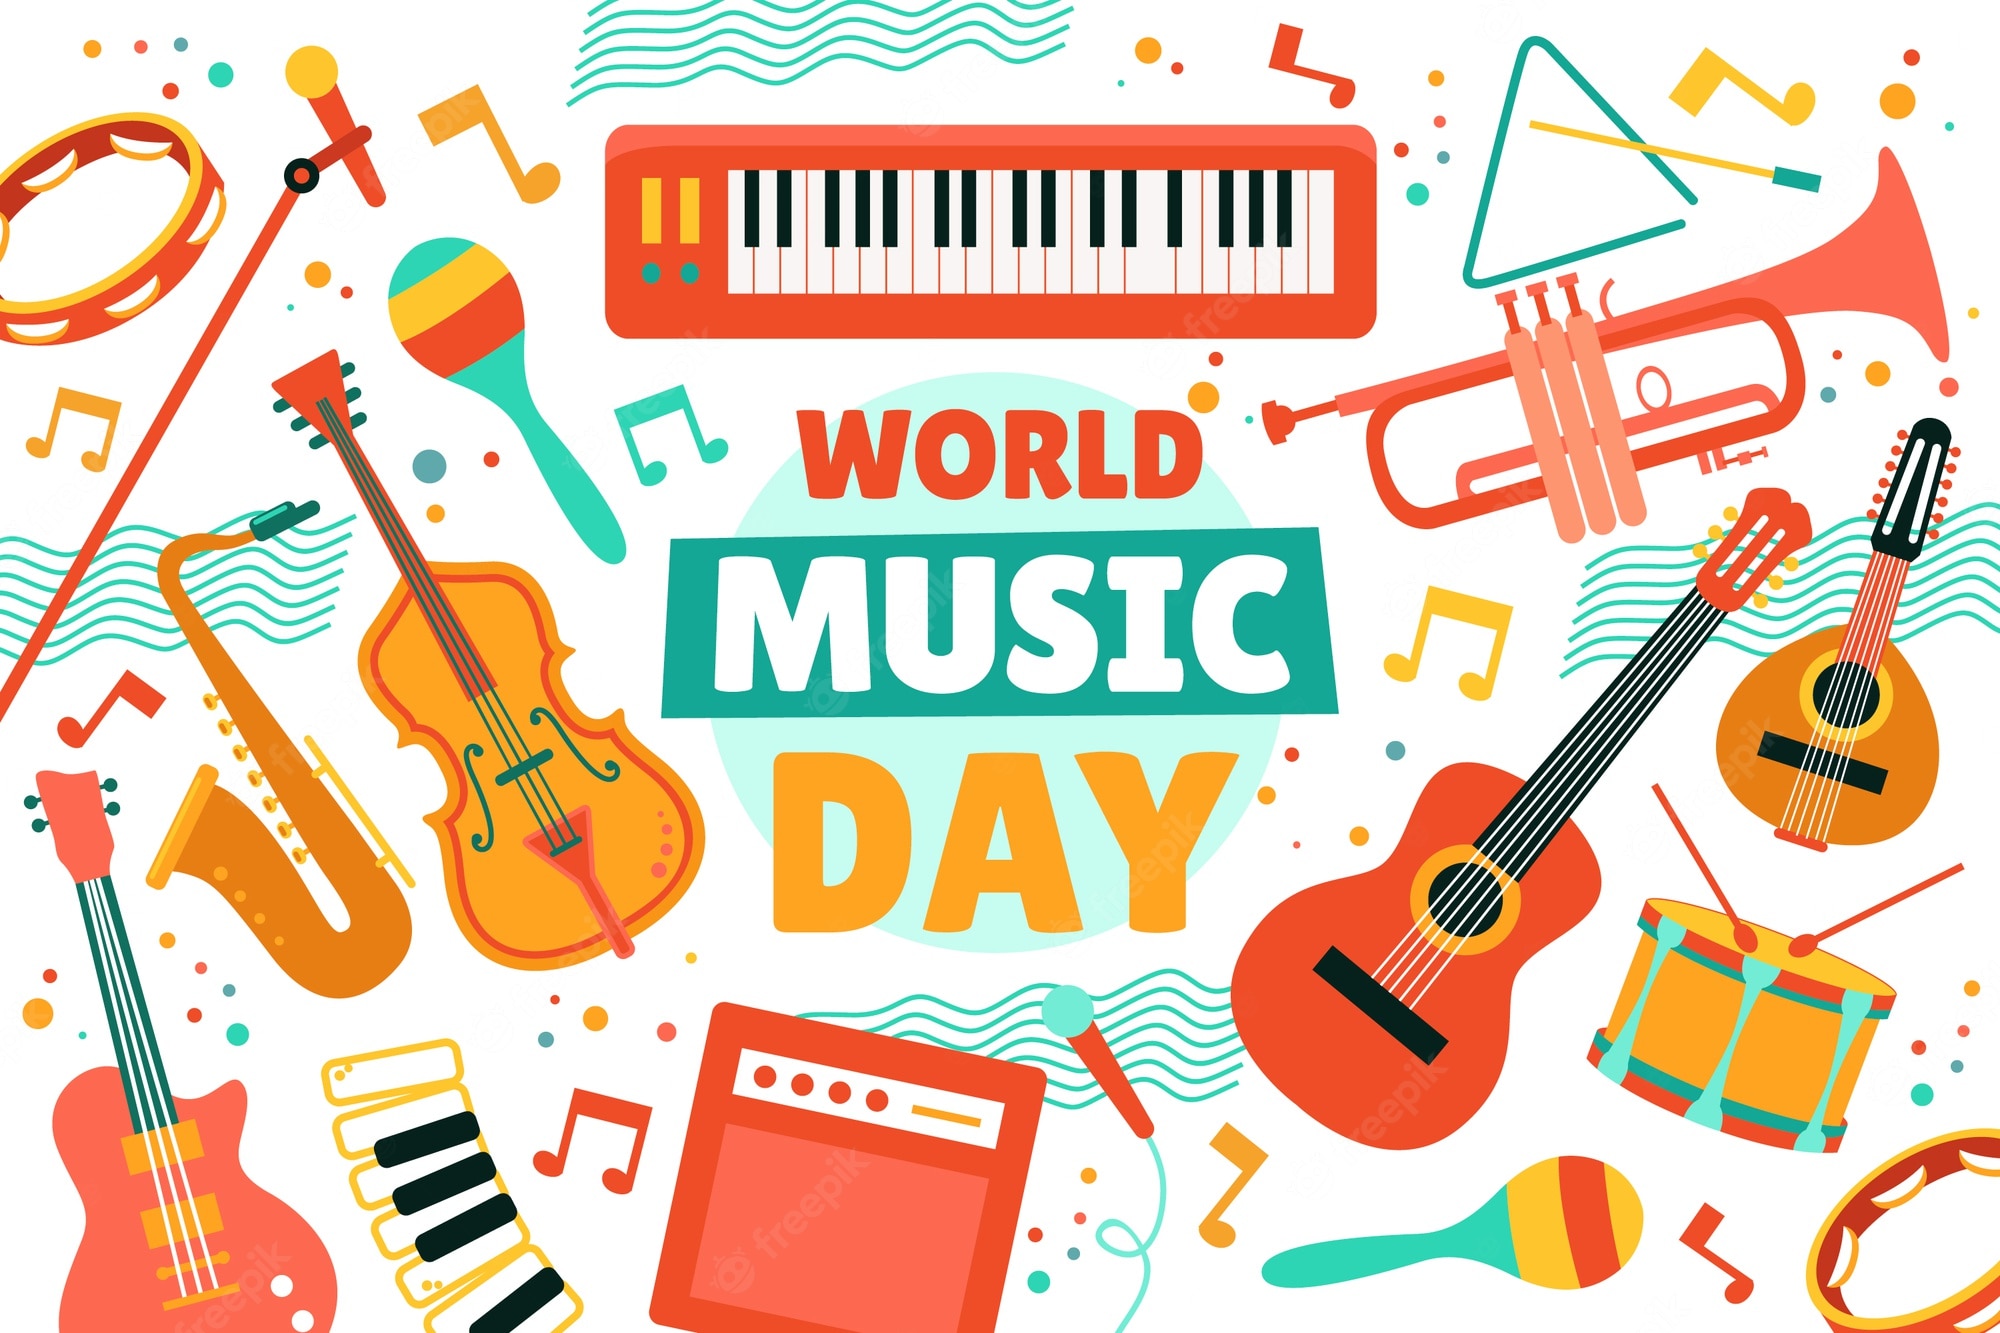 Make music day images free vectors stock photos psd